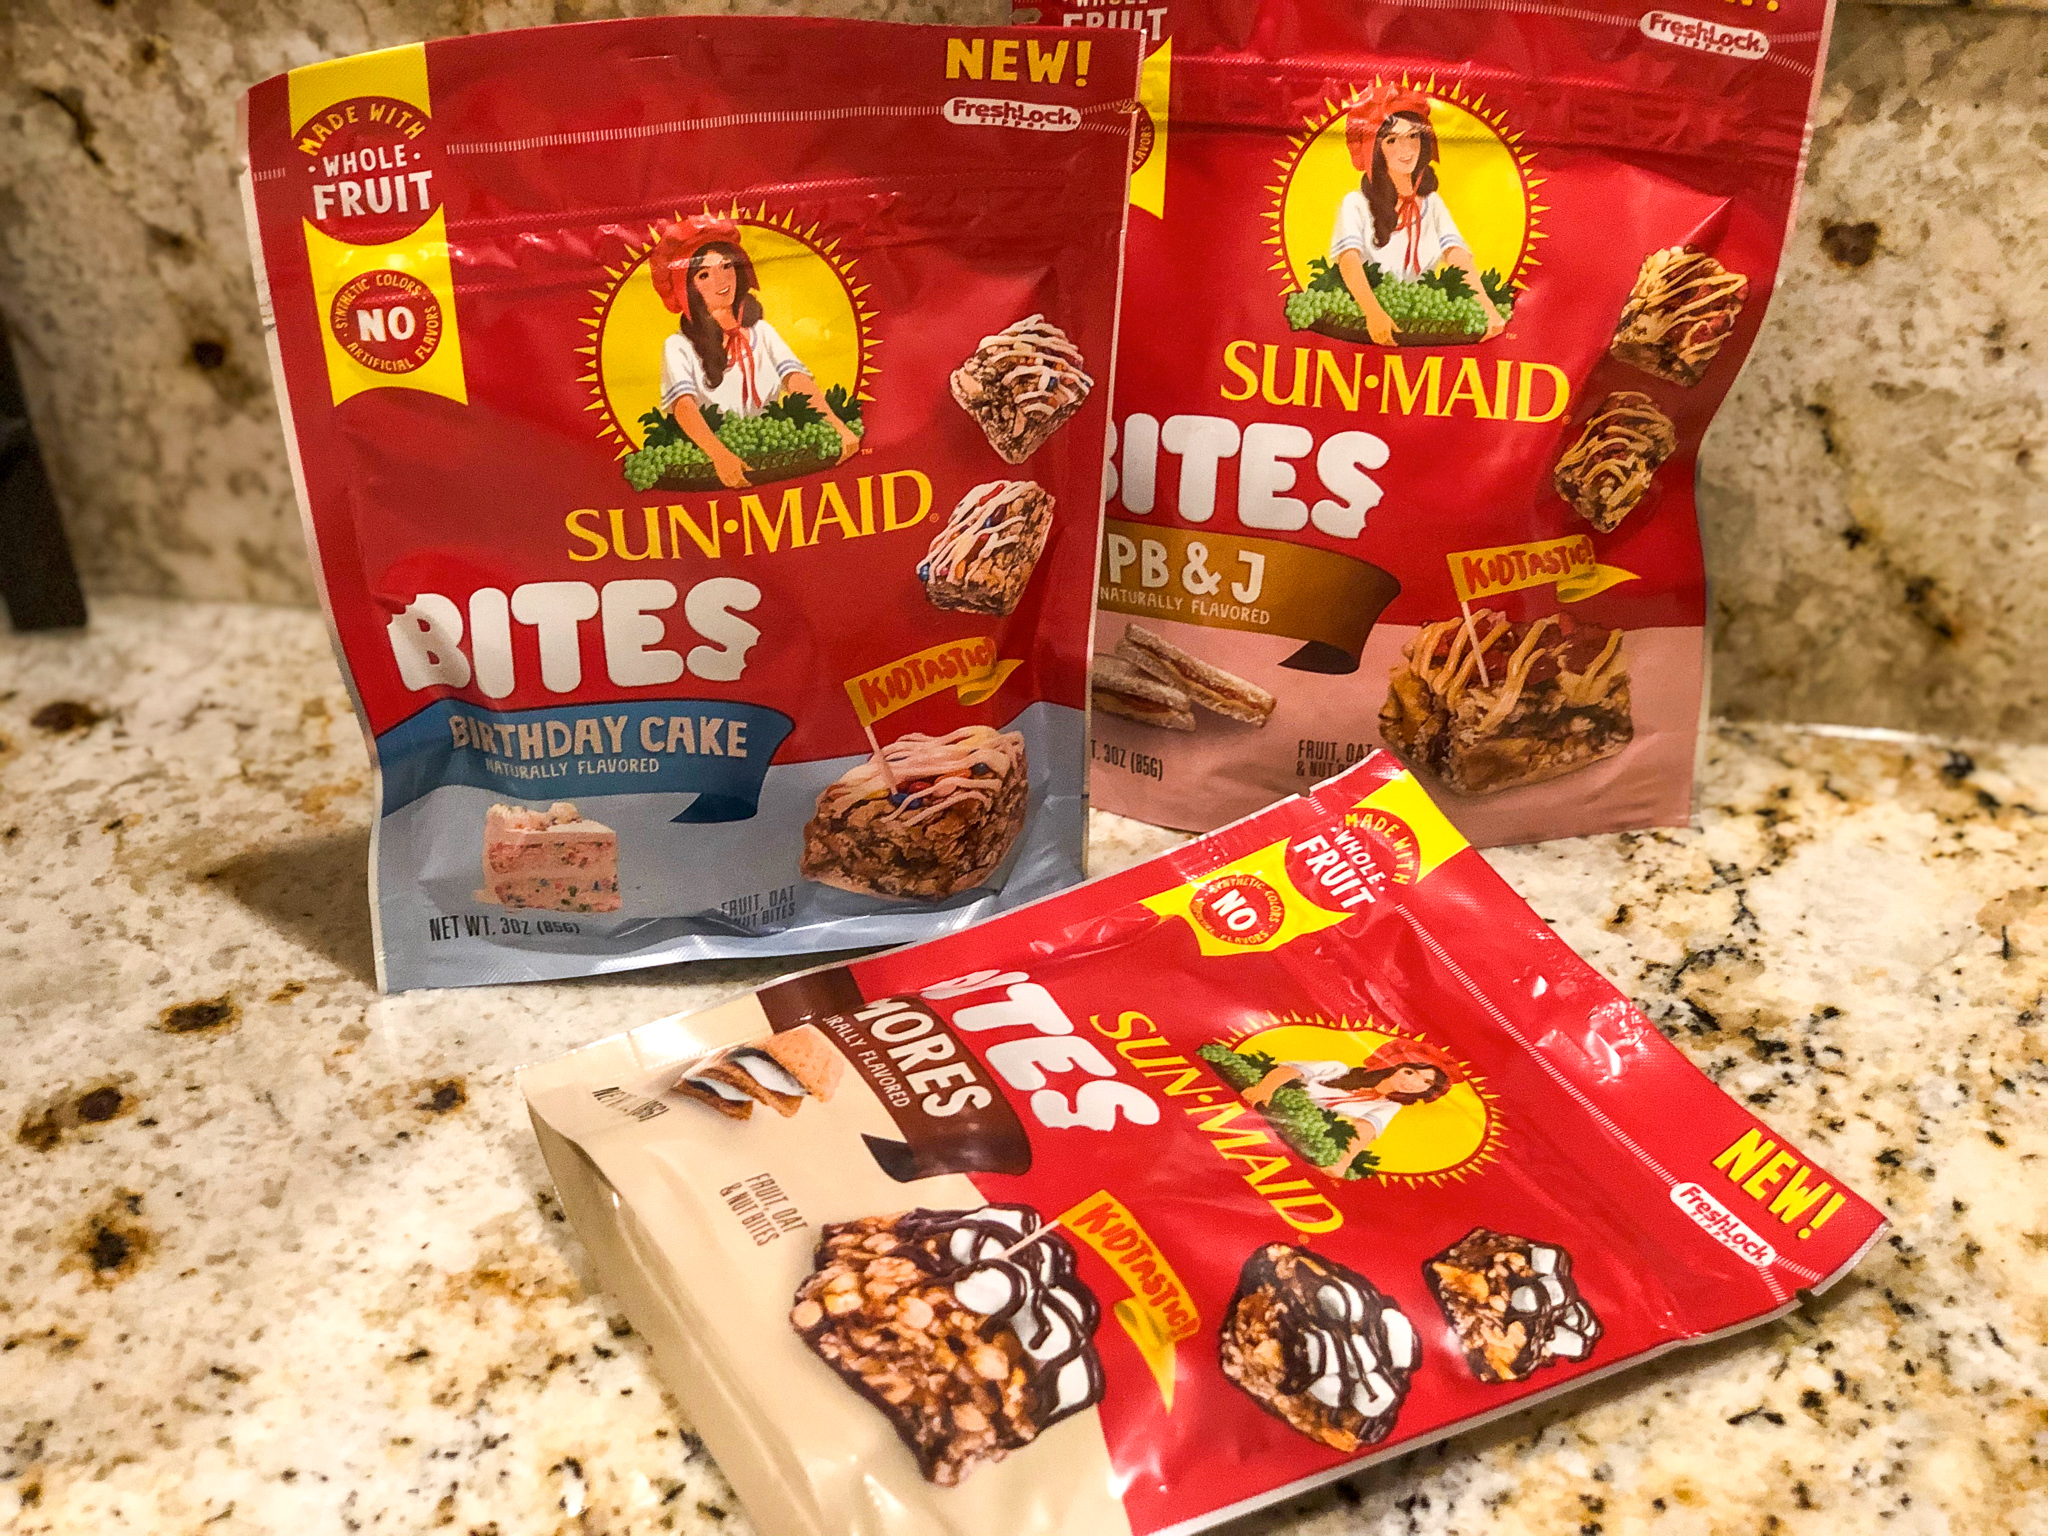 Find Great-Tasting Sun-Maid Bites At Your Local Publix - Save $2 With The Digital Coupon! on I Heart Publix